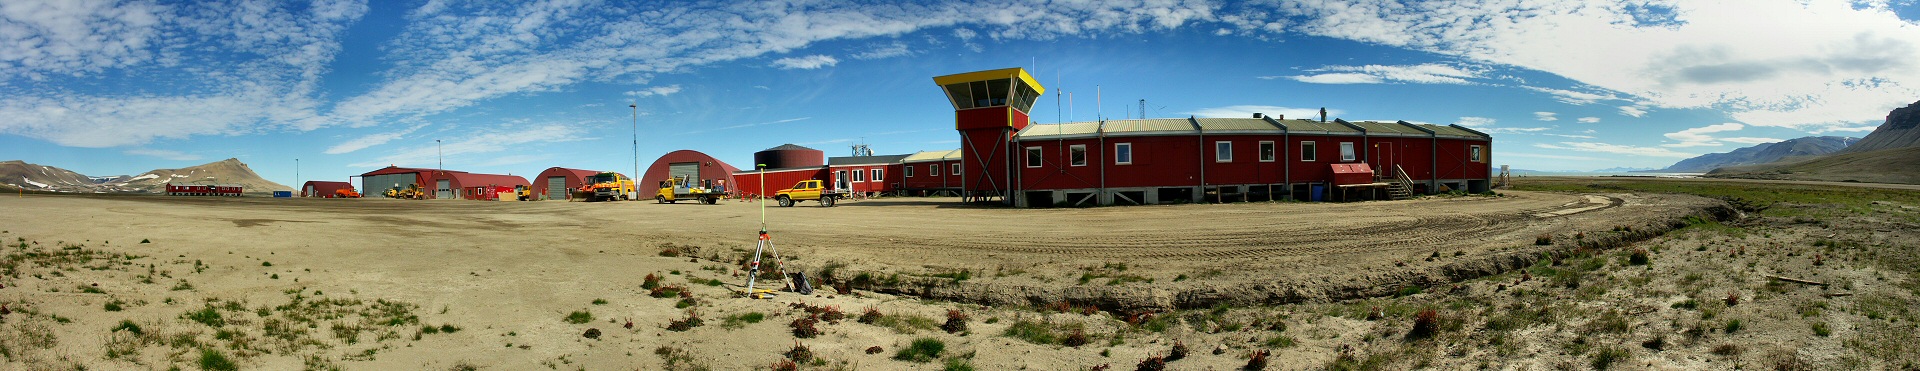 Constable point airport, greenland